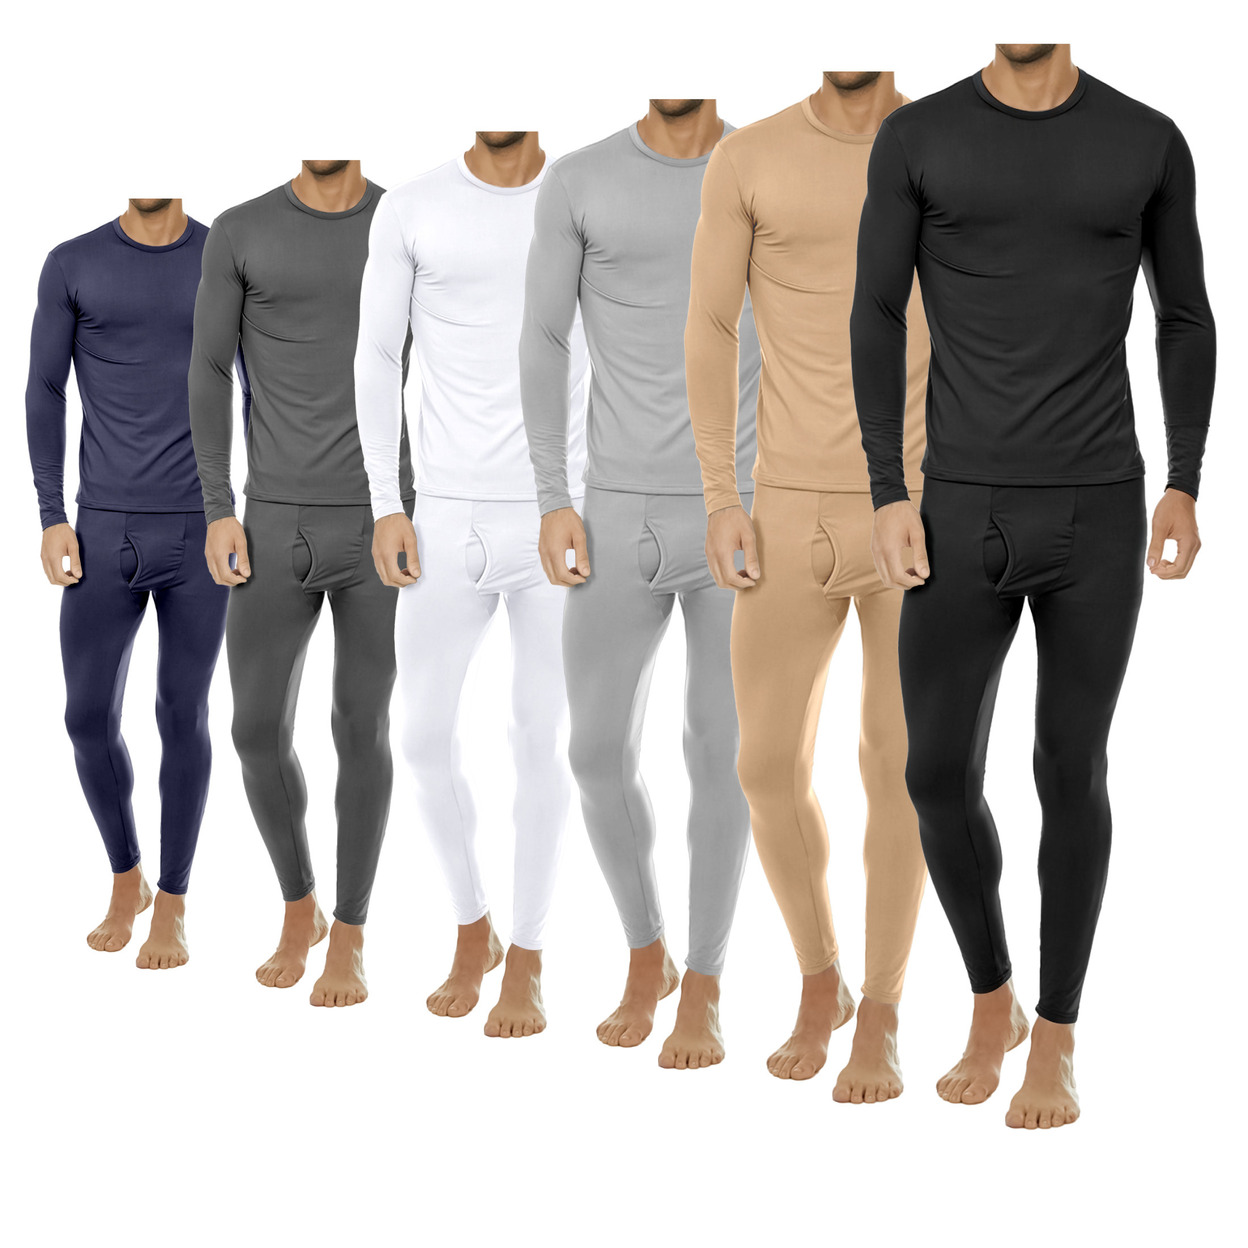 2-Pieces: Men's Winter Warm Fleece Lined Thermal Underwear Set For Cold Weather - Navy, X-large